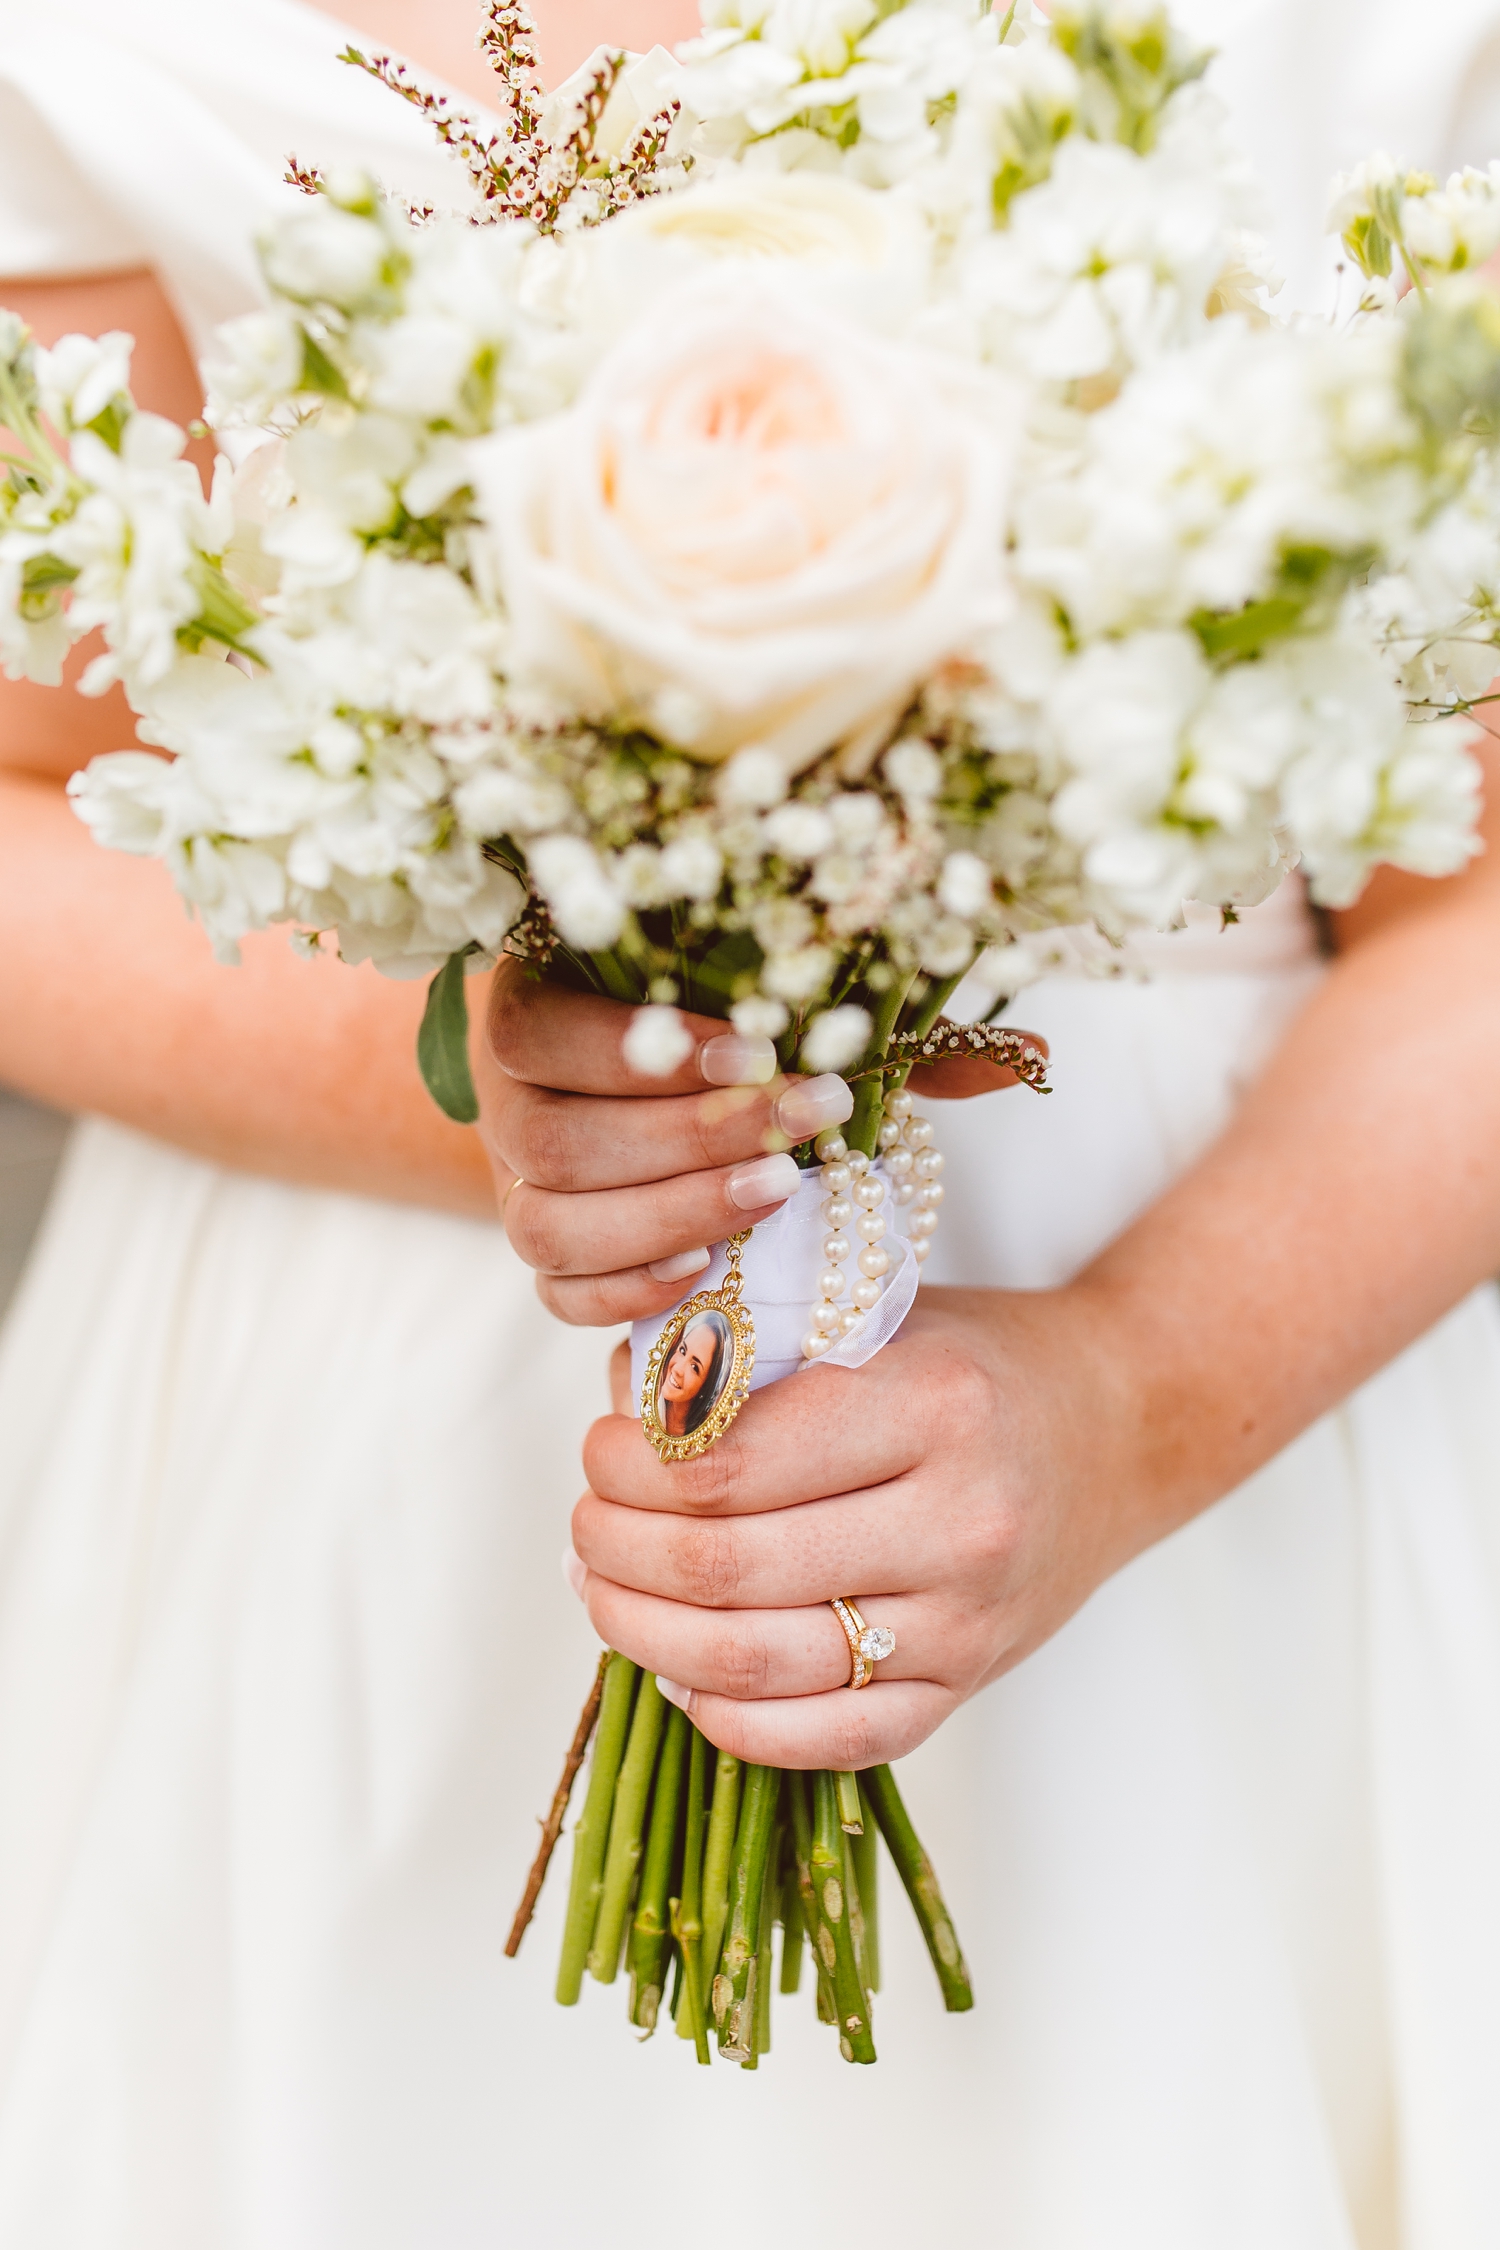 Bride holding bouquet with sister's picture in locket | Brooke Michelle Photo